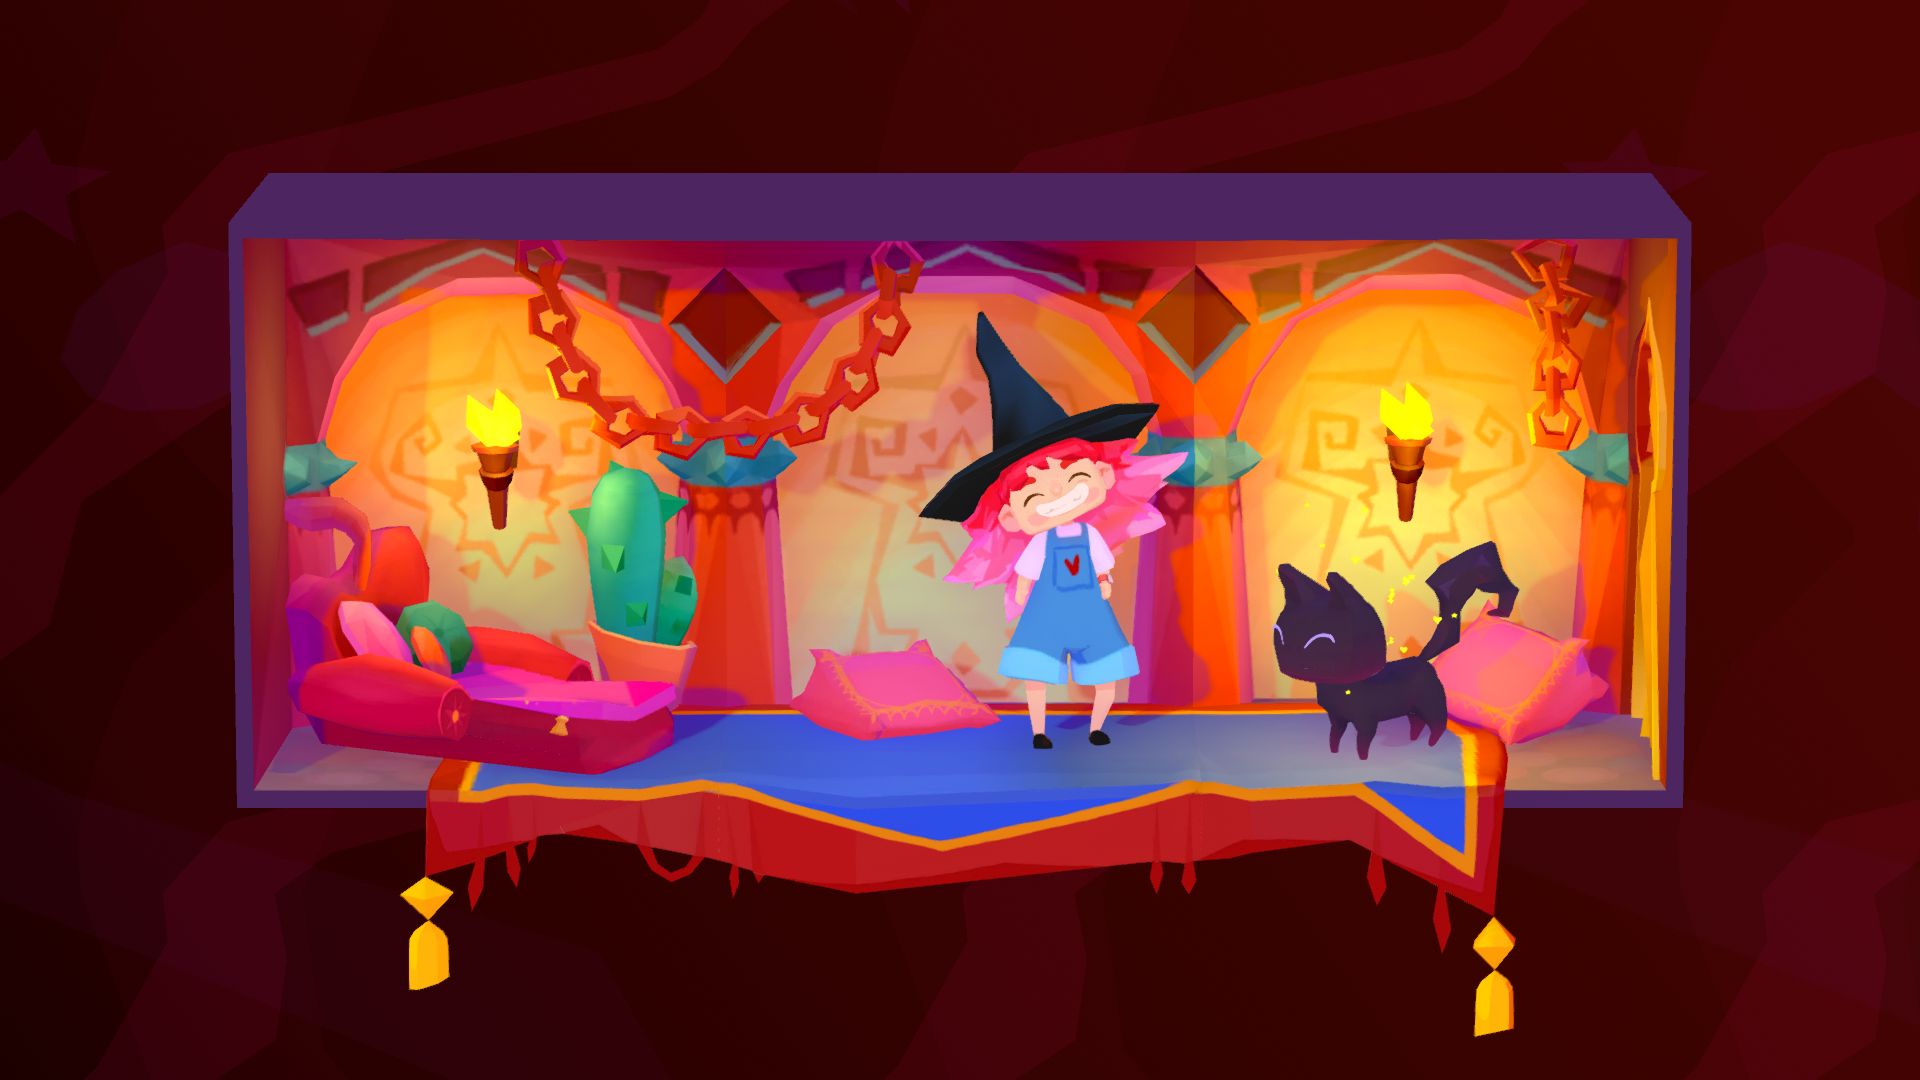 Harmony, a witch, and her little black cat, standing in a small diorama corridor with rugs and cushions on the floor.